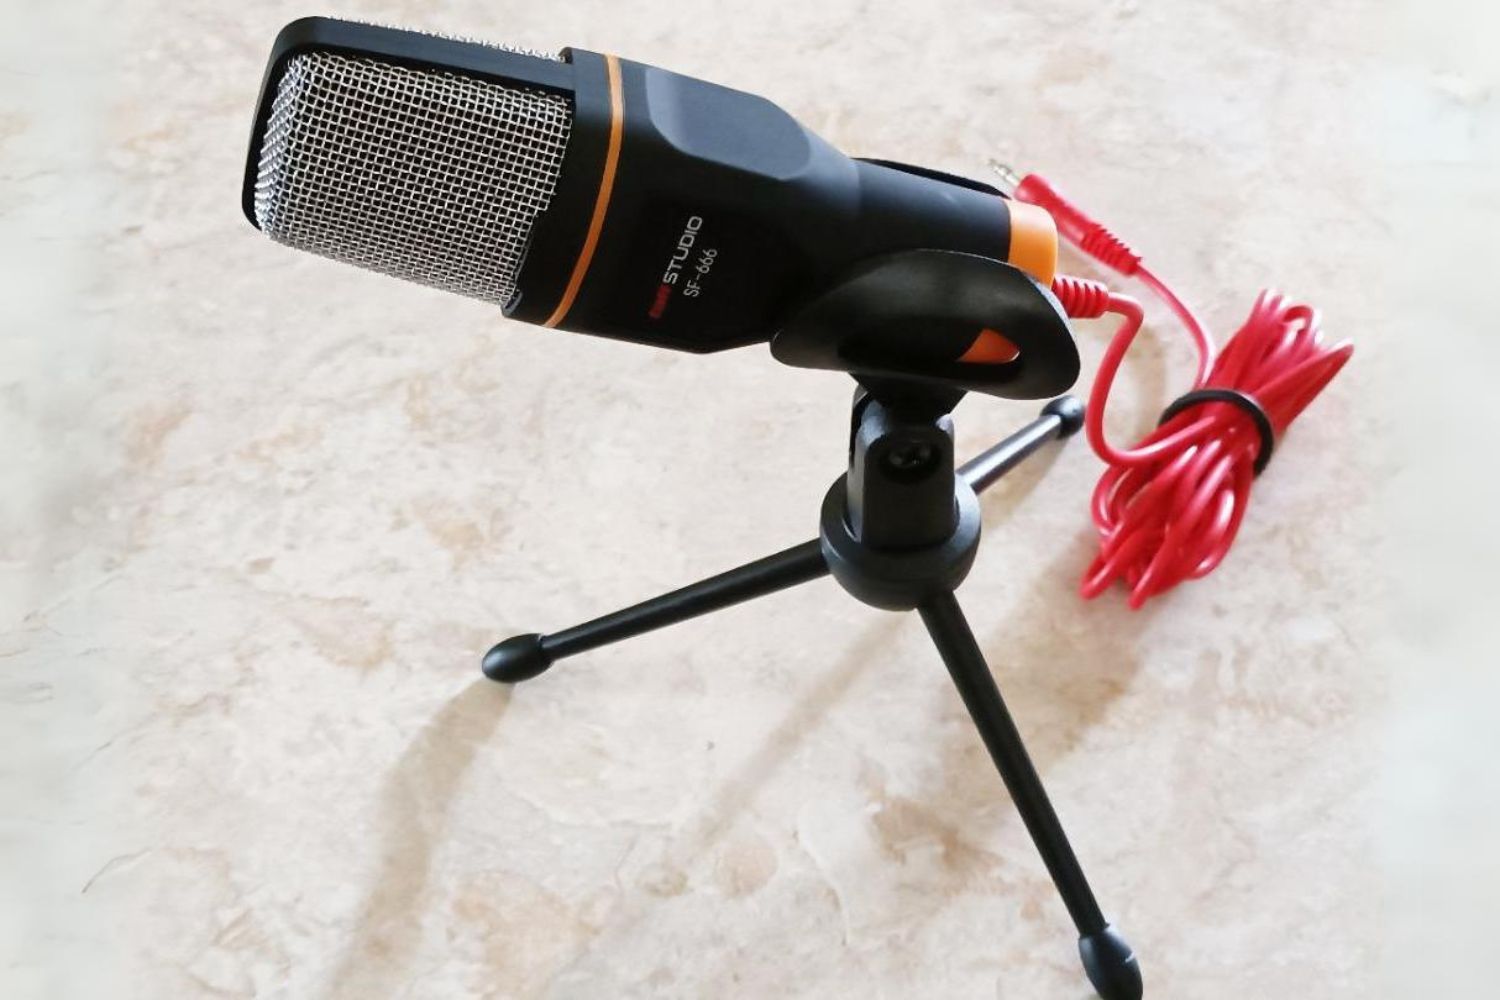 Sunjet Condenser Microphone With Tripod Stand: How To Turn It On